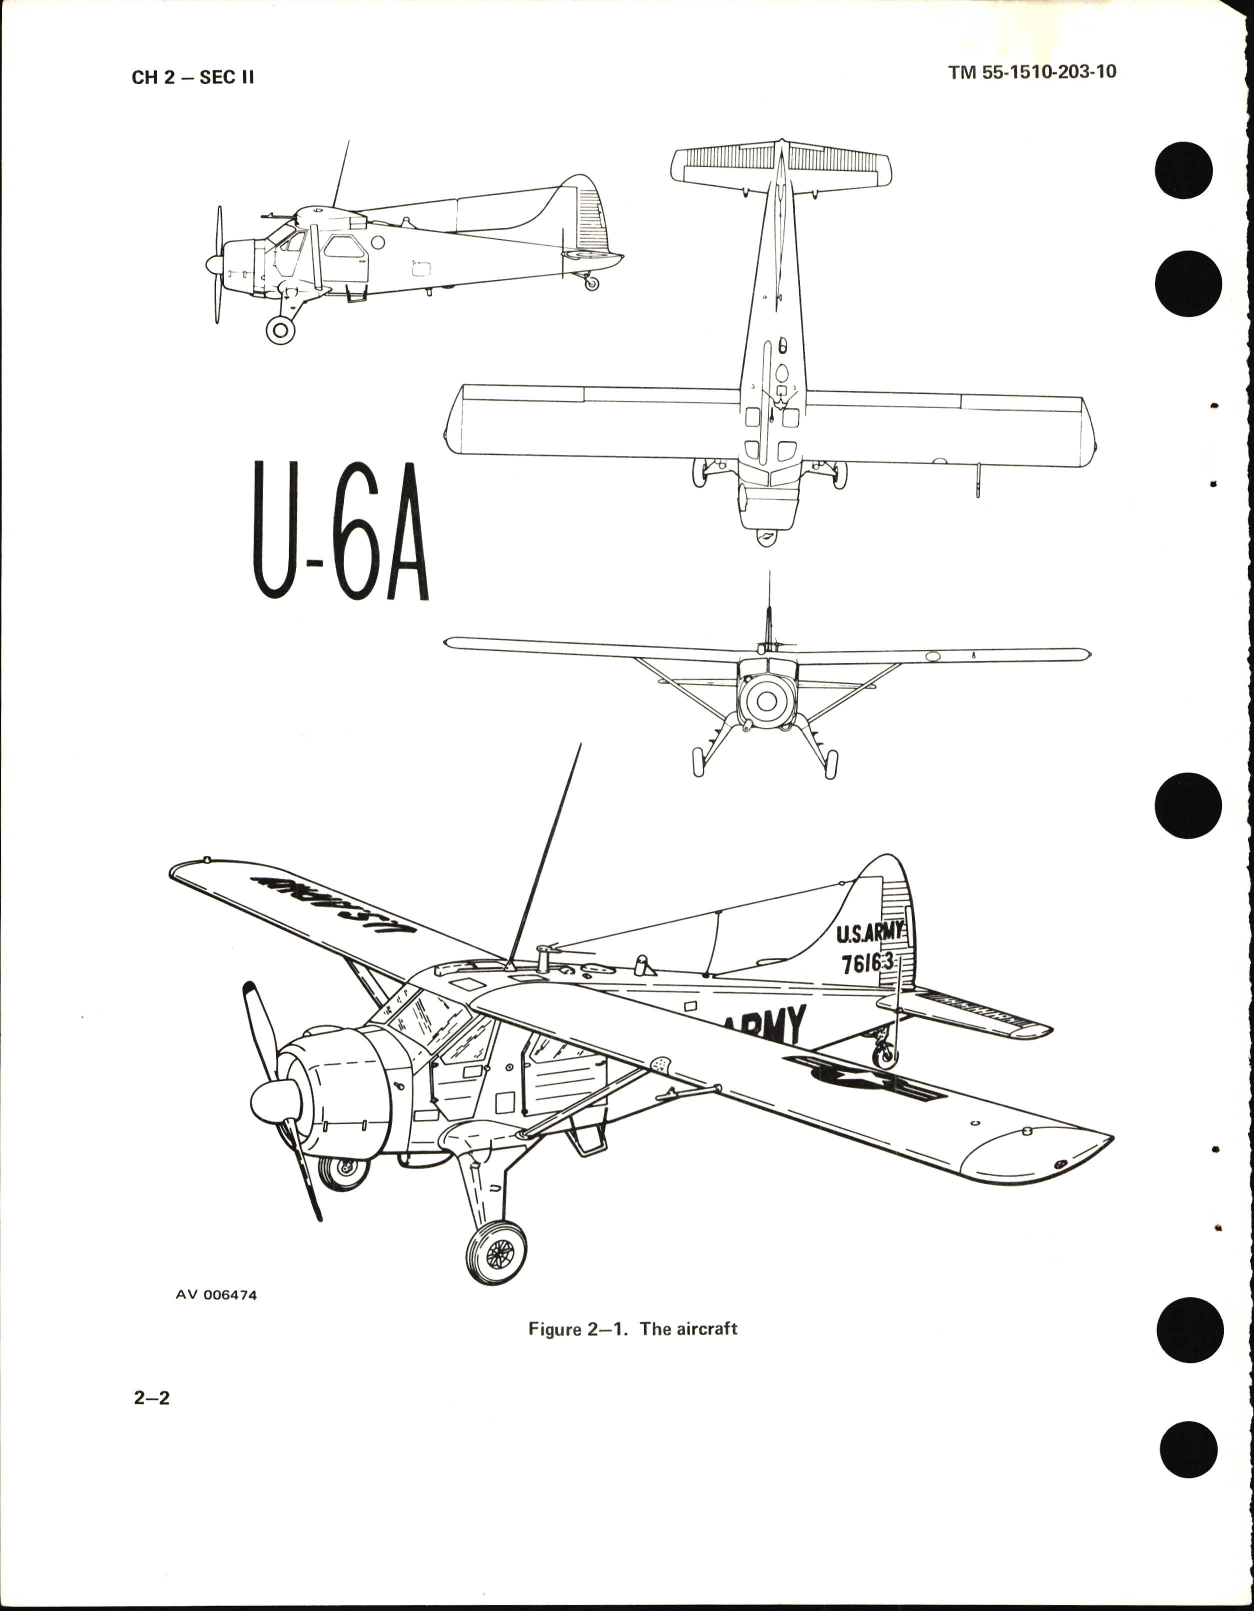 Sample page 8 from AirCorps Library document: Operators Manual for U-6A 